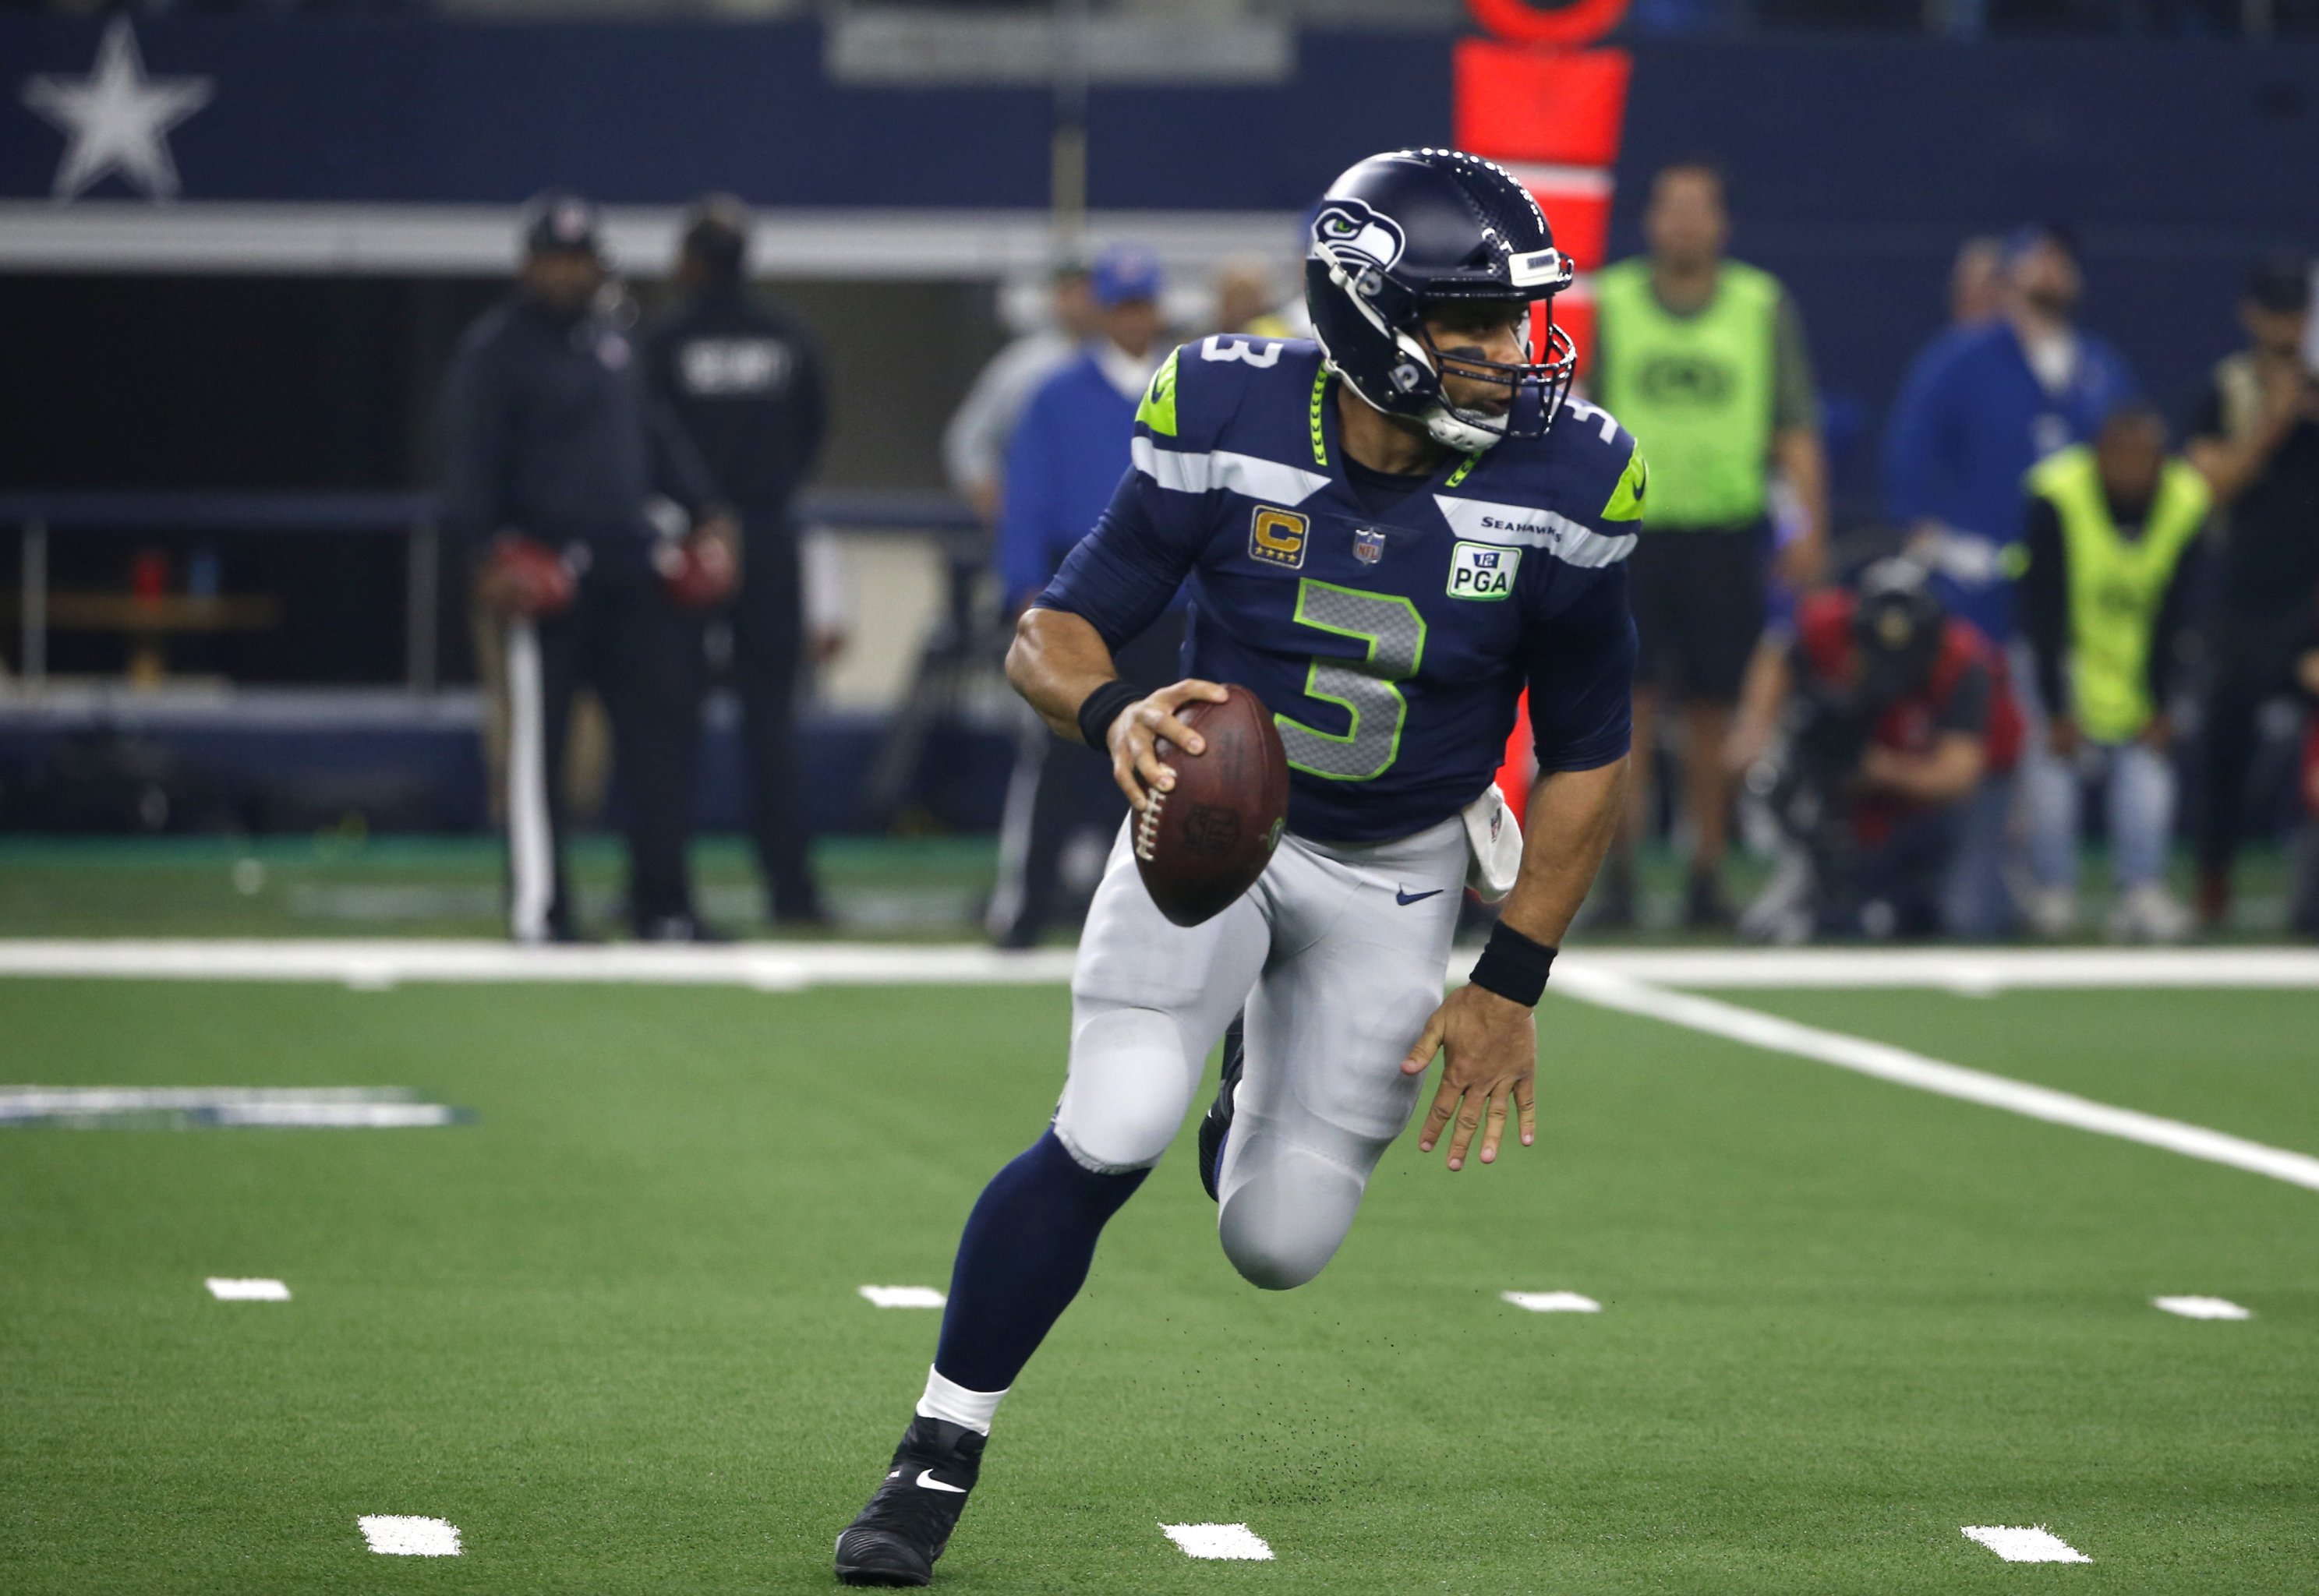 Give it up for your 2019-2020 Back-2-Back Precision Passer Champion! :  r/Seahawks